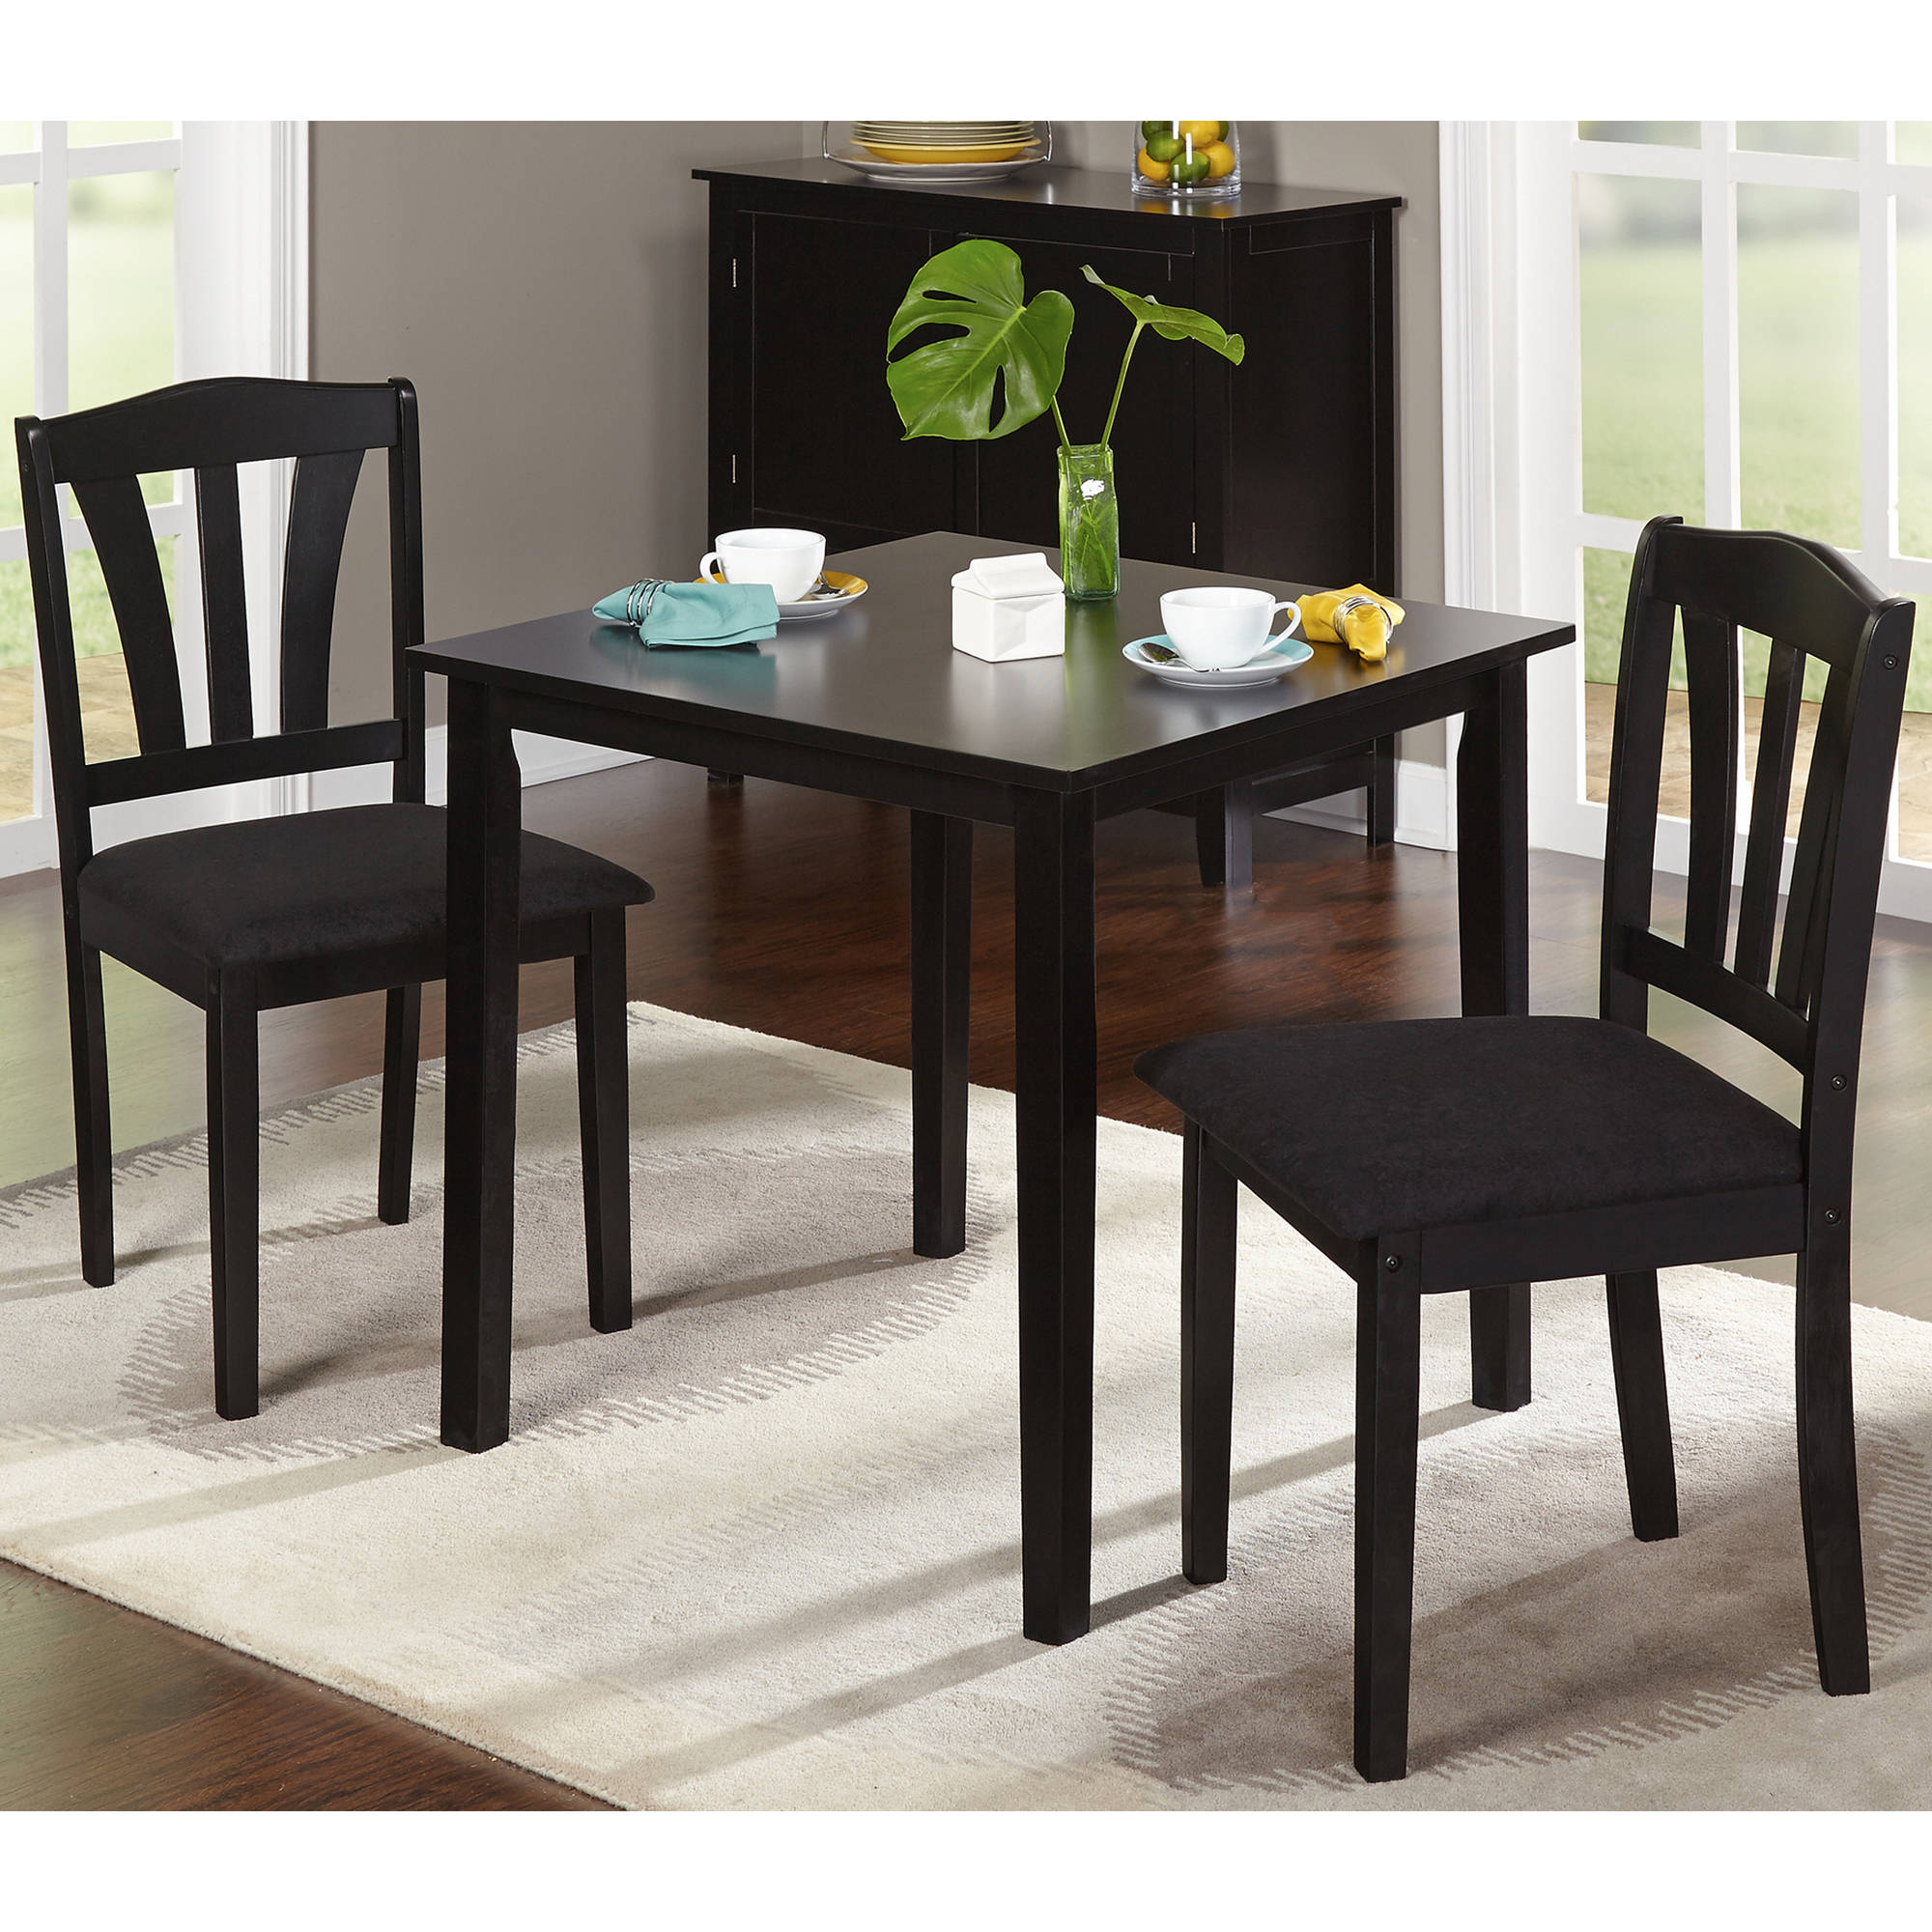 3 Pc Kitchen Table Set With A Kitchen Table And 2 Wood Seat Dining Chairs In Black And Cherry Home Kitchen Furniture